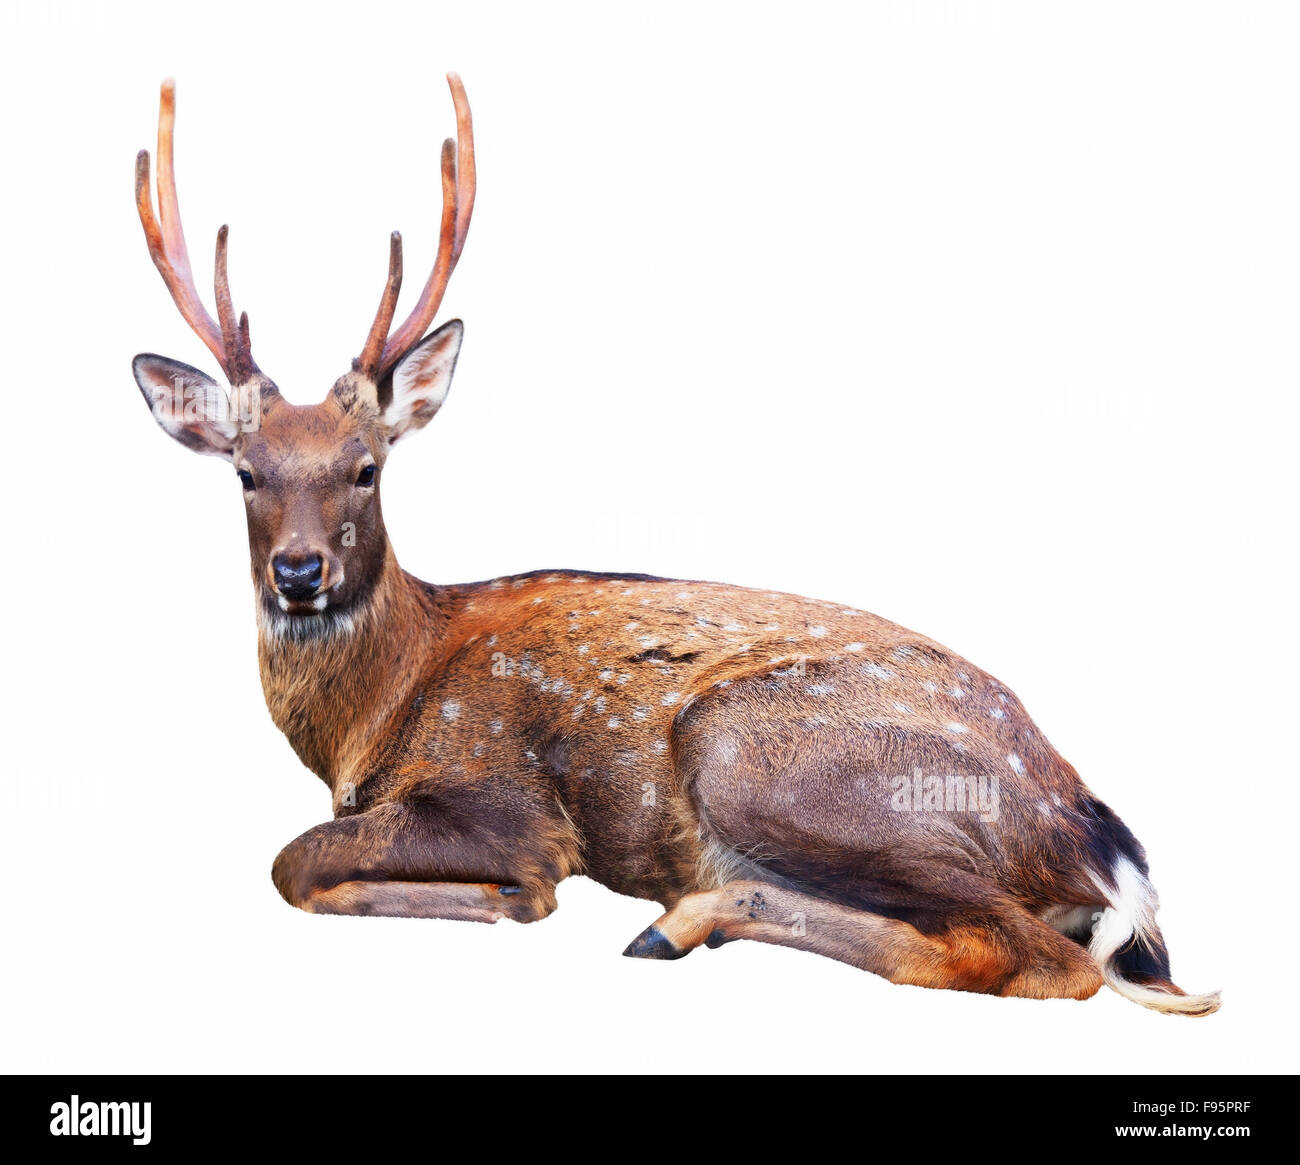 Deer sitting down Cut Out Stock Images & Pictures - Alamy